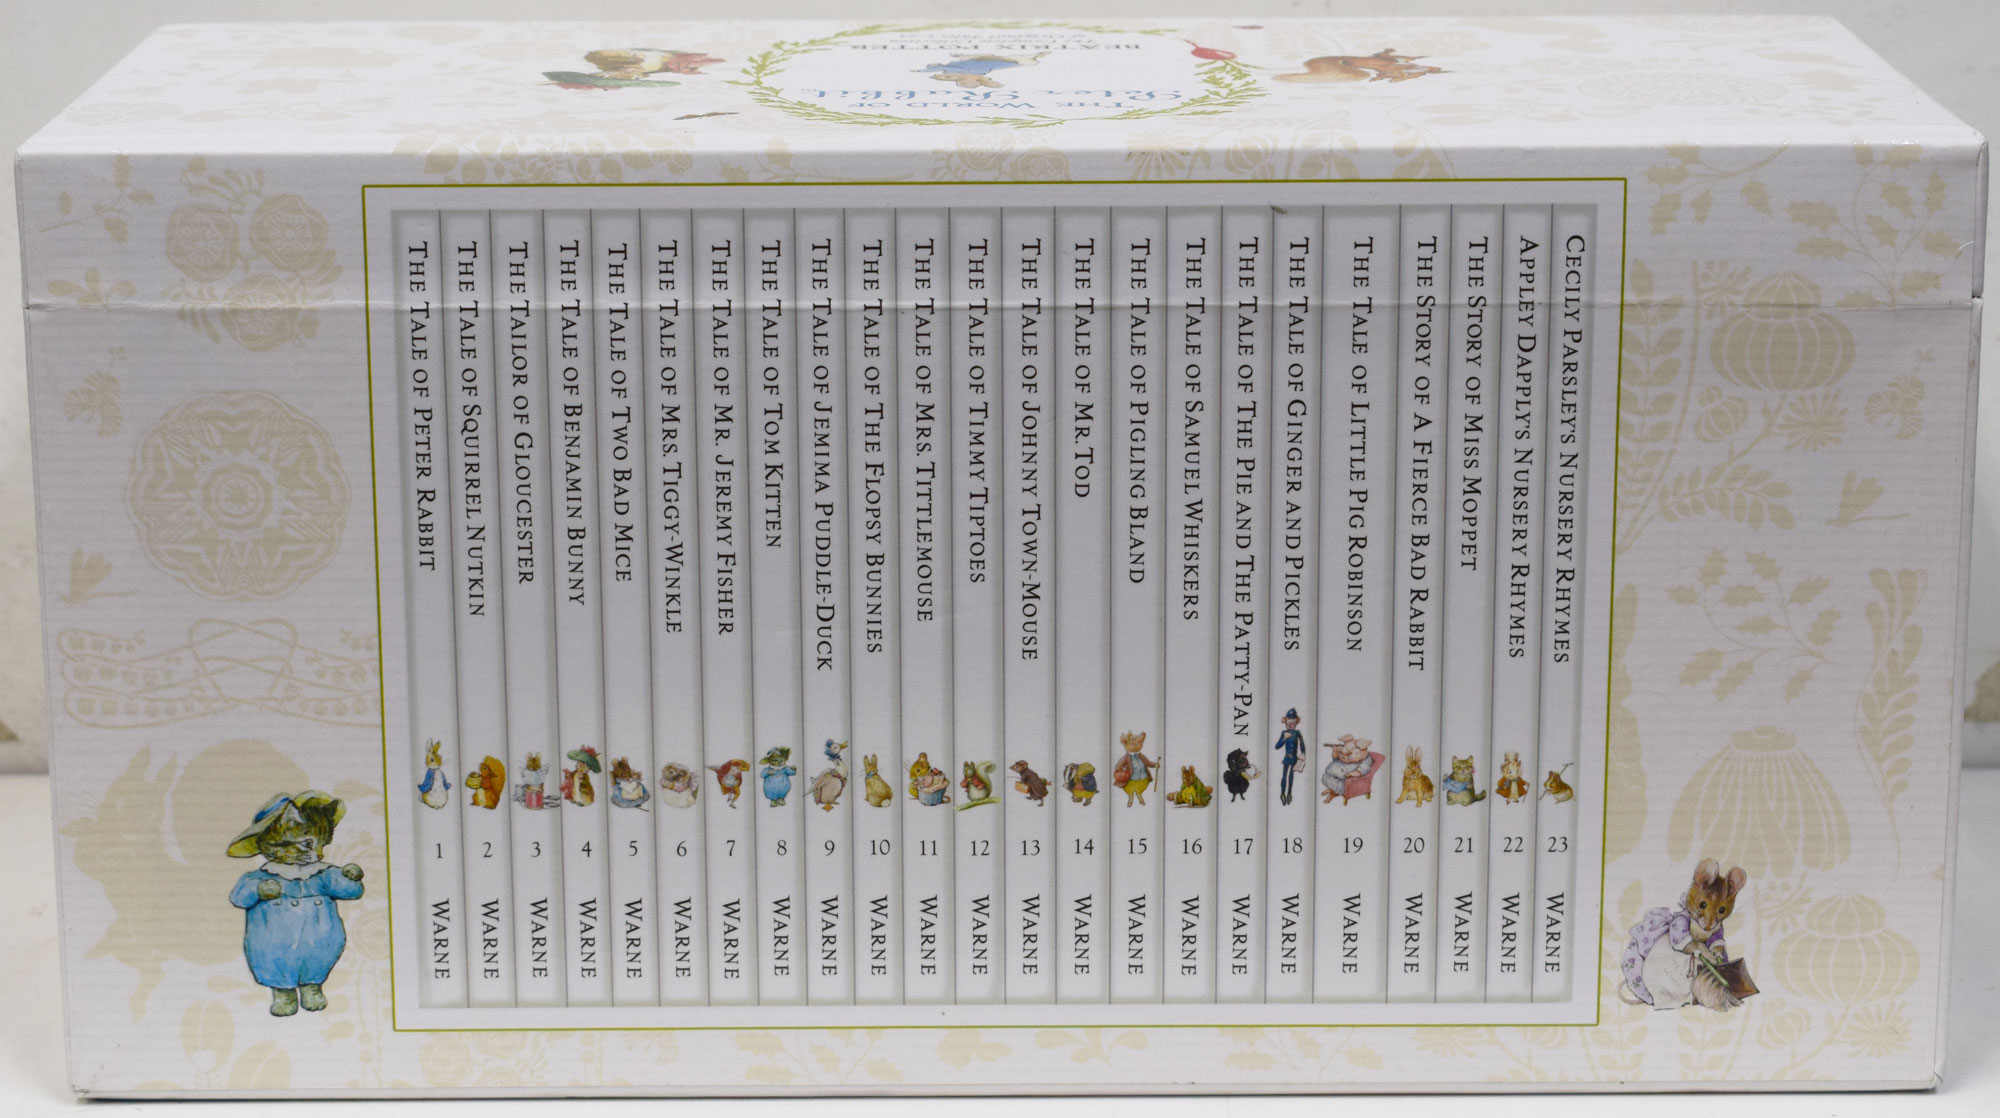 The World of Peter Rabbit. The Complete Collection of Original Tales 1 - 23. Boxed set.